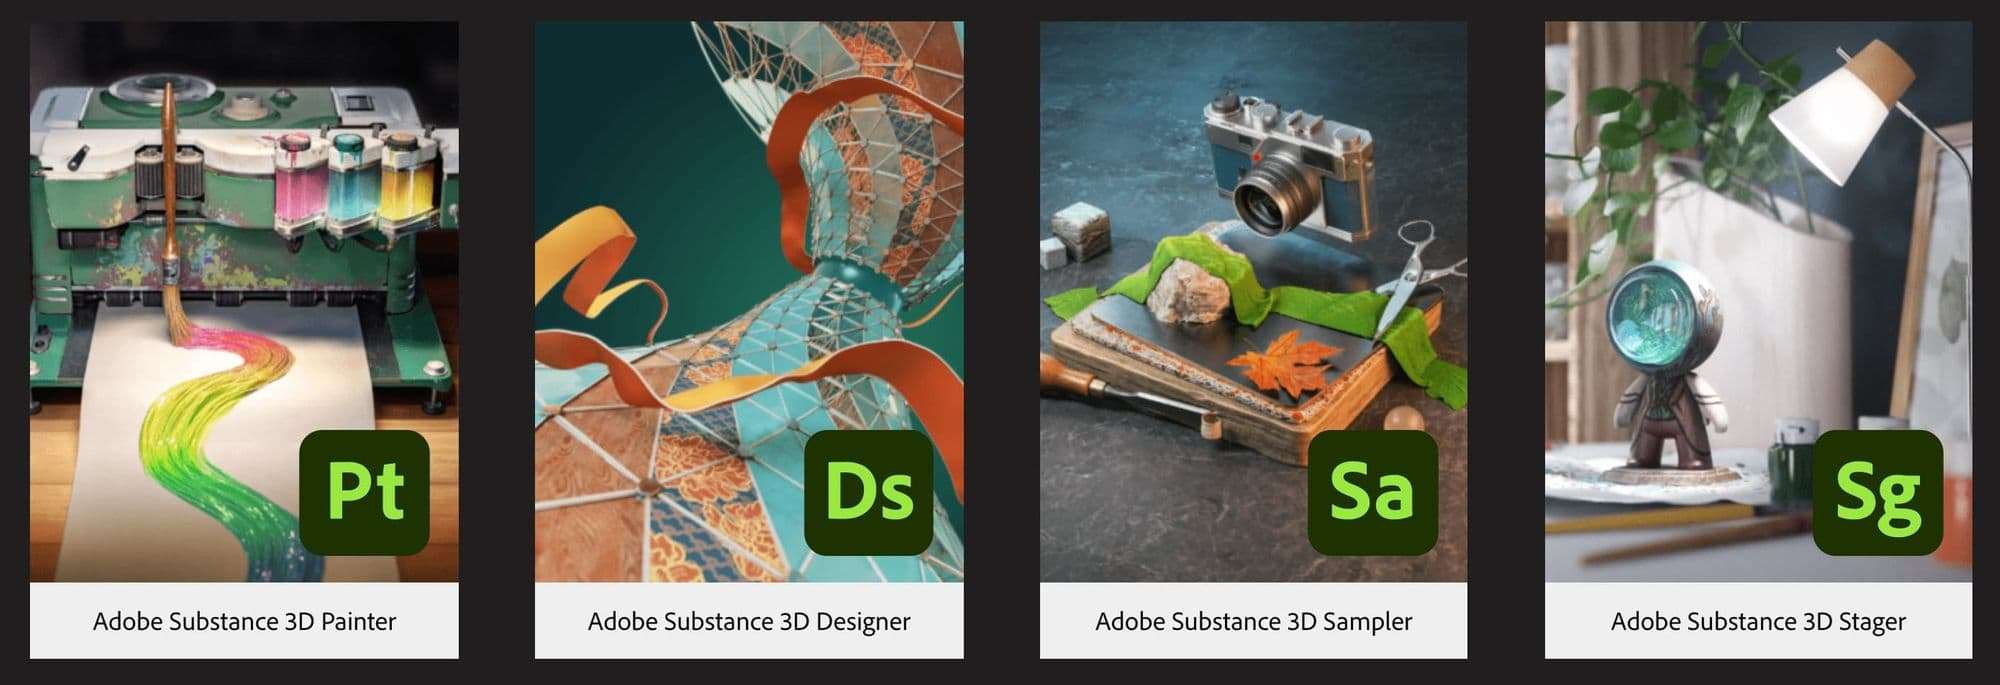 Adobe Substance 3D Stager 2.1.1.5626 instal the last version for ipod